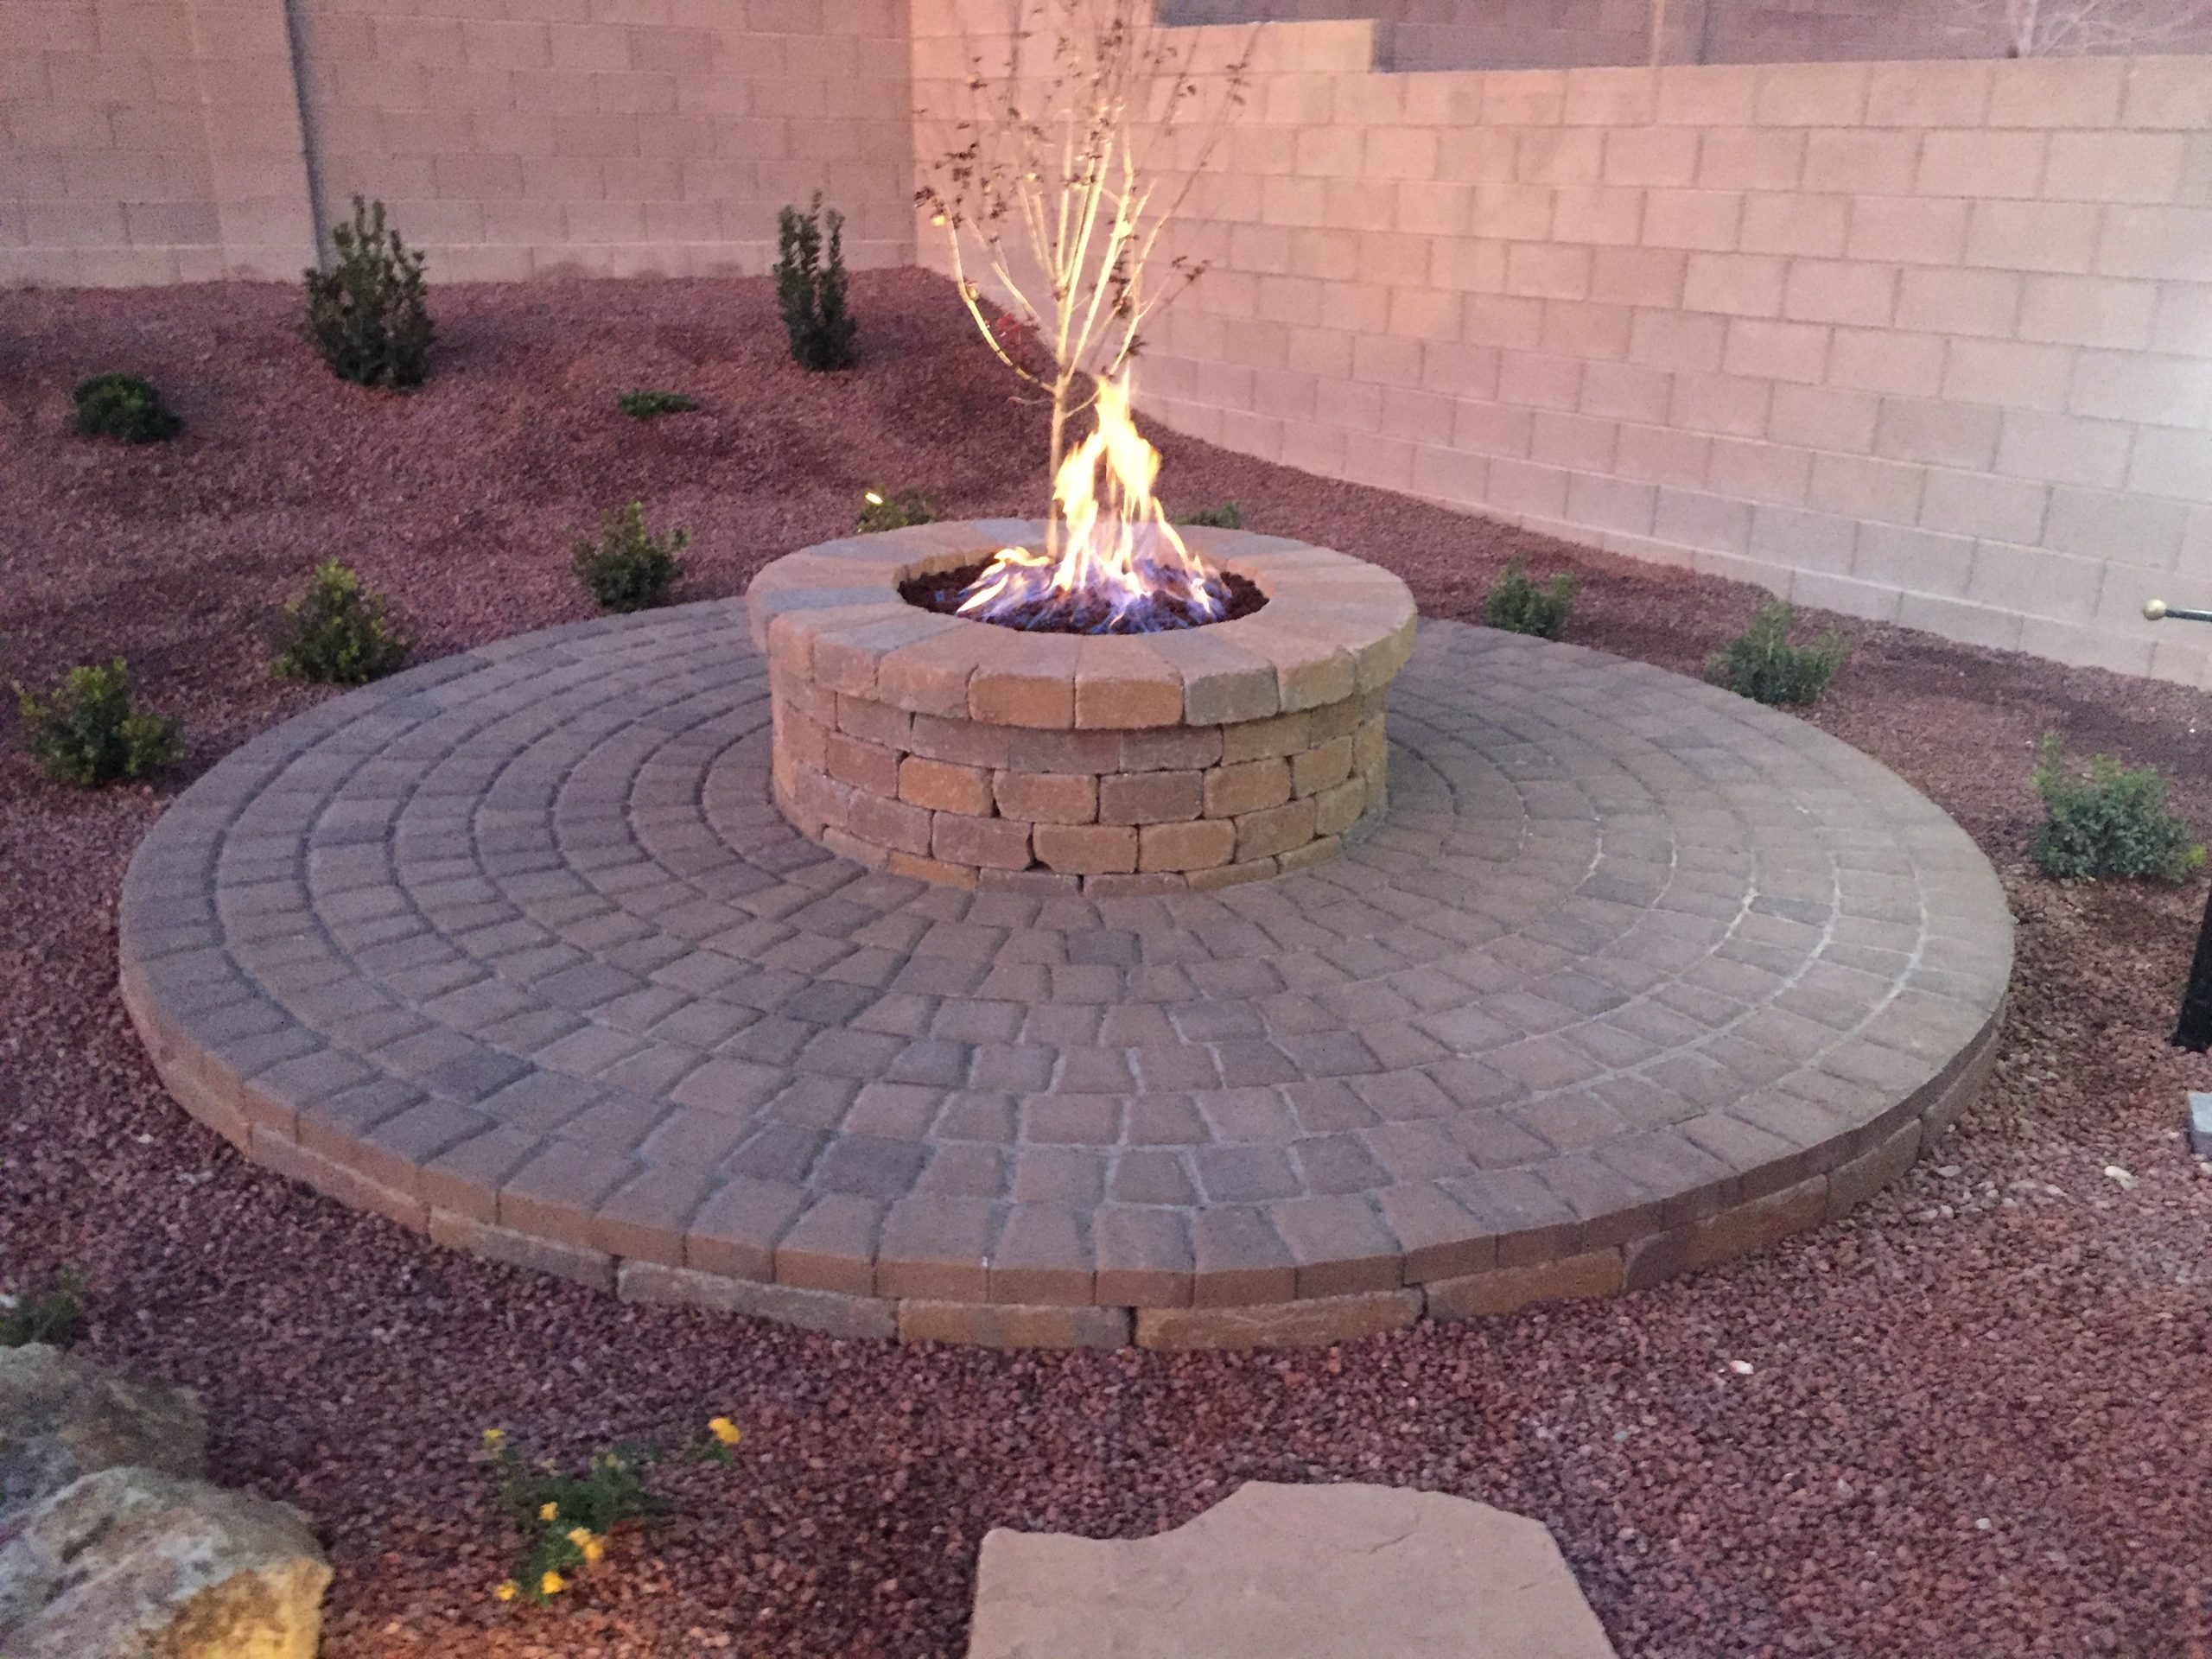 A custom fire pit atop a paved patio.